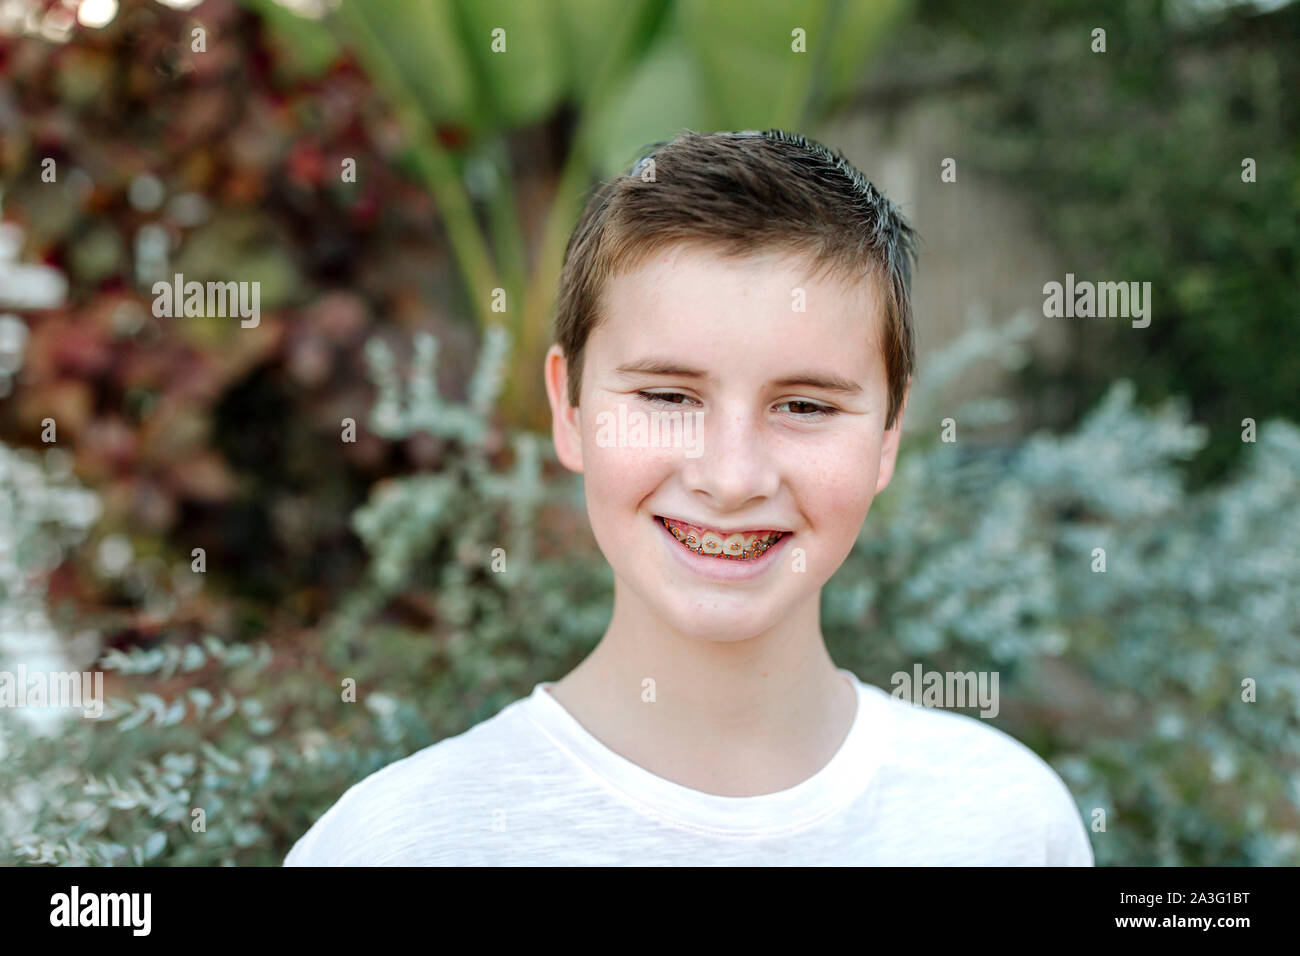 Smiling preteen boy with braces in white tshirt with lush plants Stock Photo